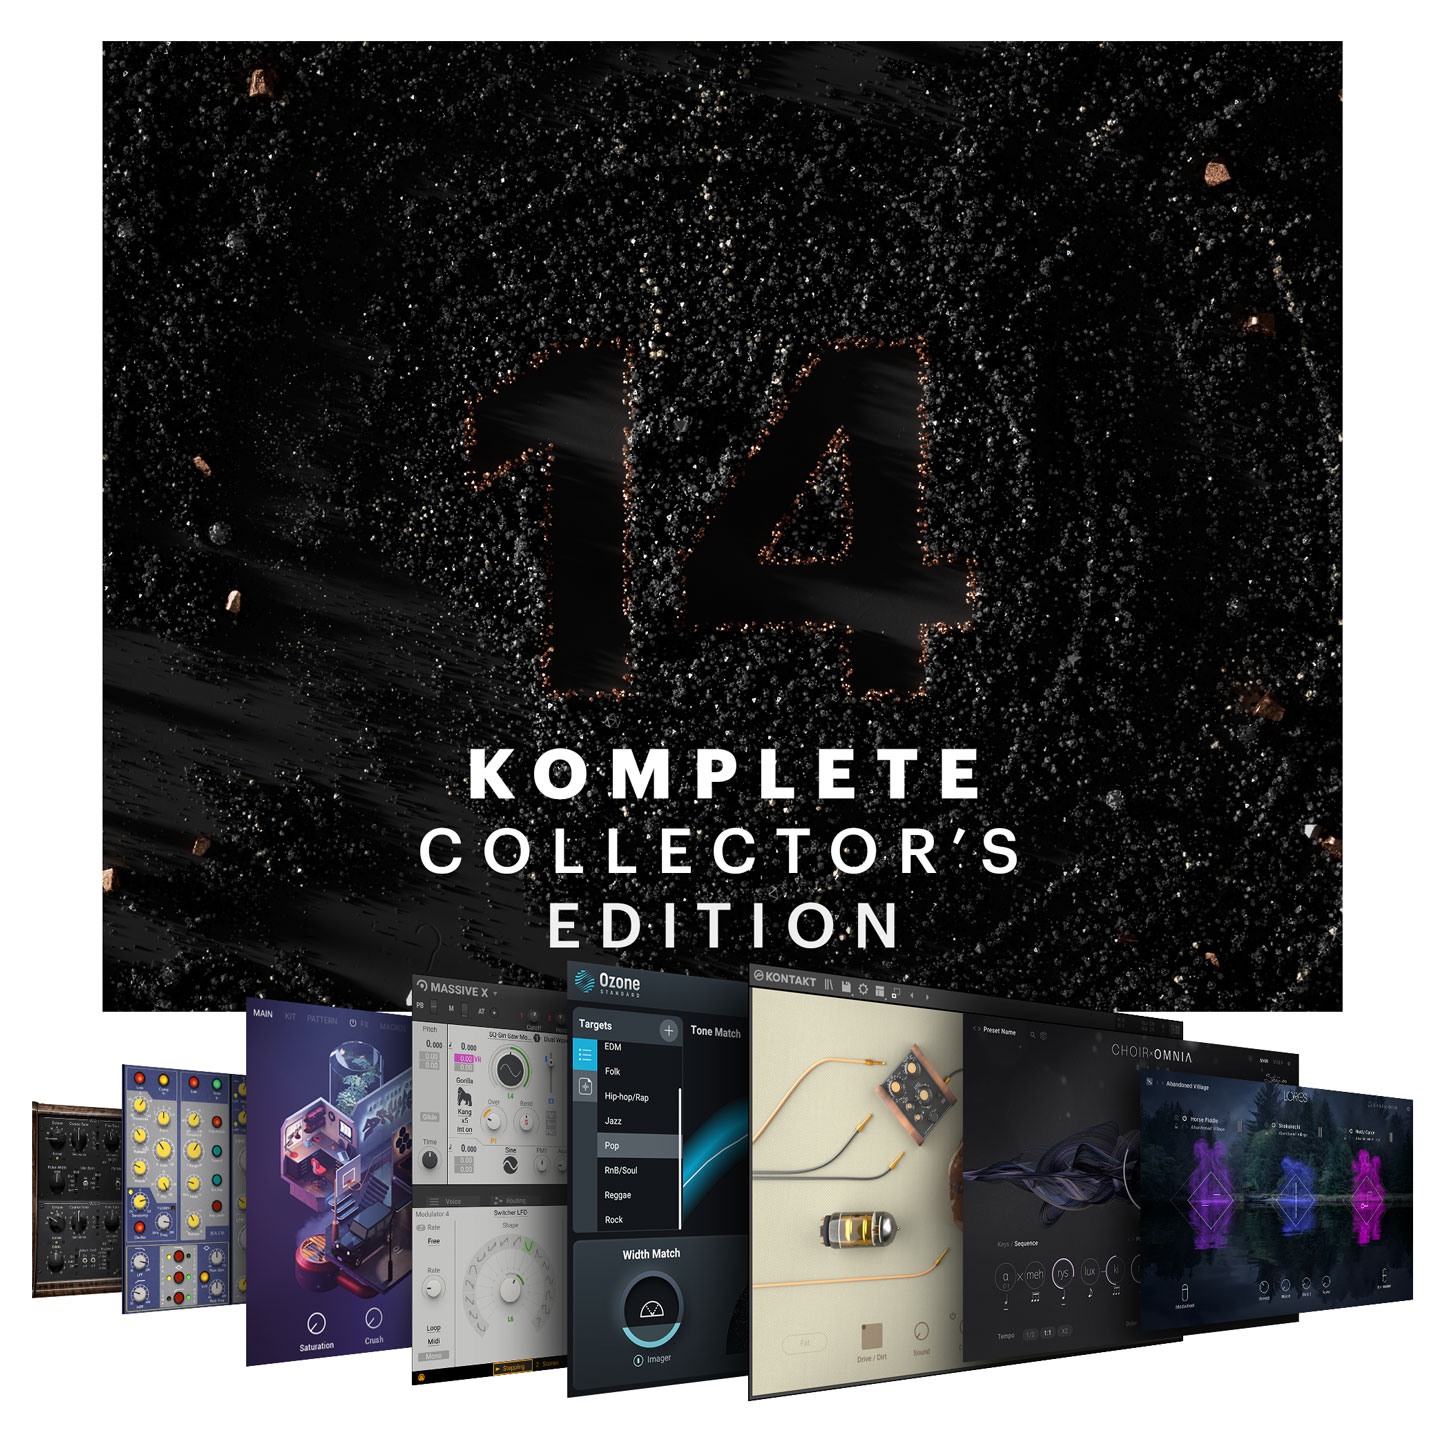 Komplete 14 Ultimate Collector's Edition Upgrade (from Komplete 8-14)